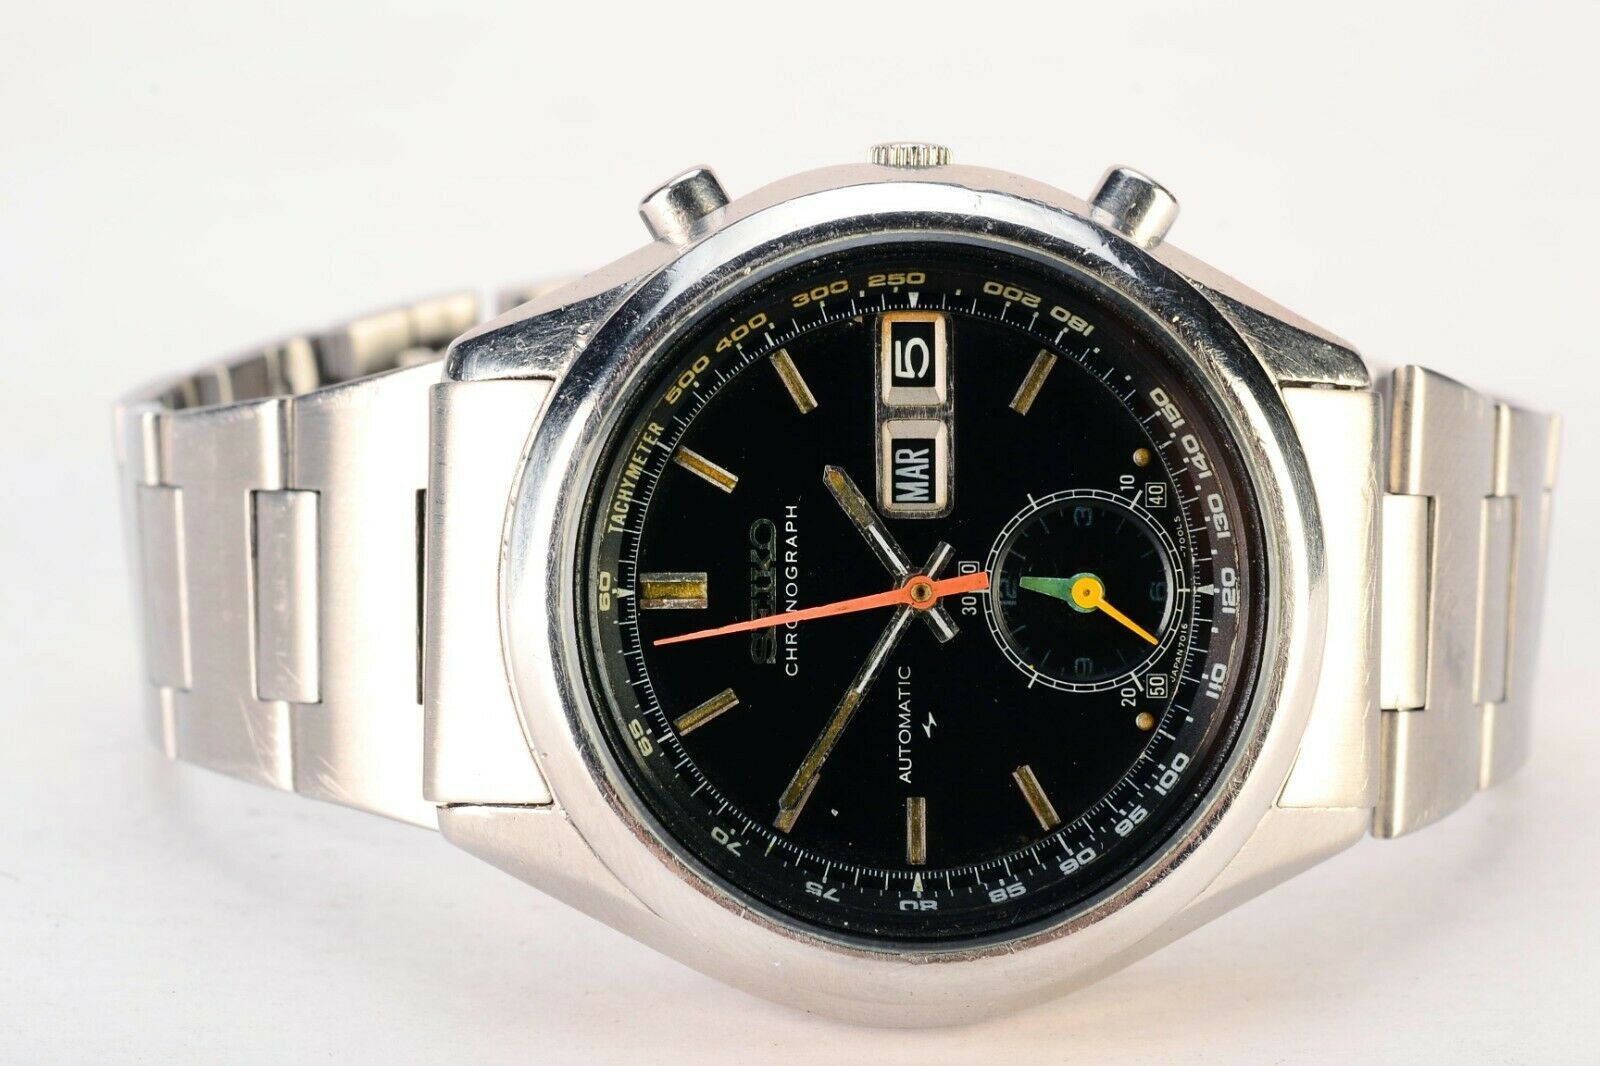 Rare Vintage Seiko 7016-7000 Day Date Chronograph Automatic  Watch |  WatchCharts